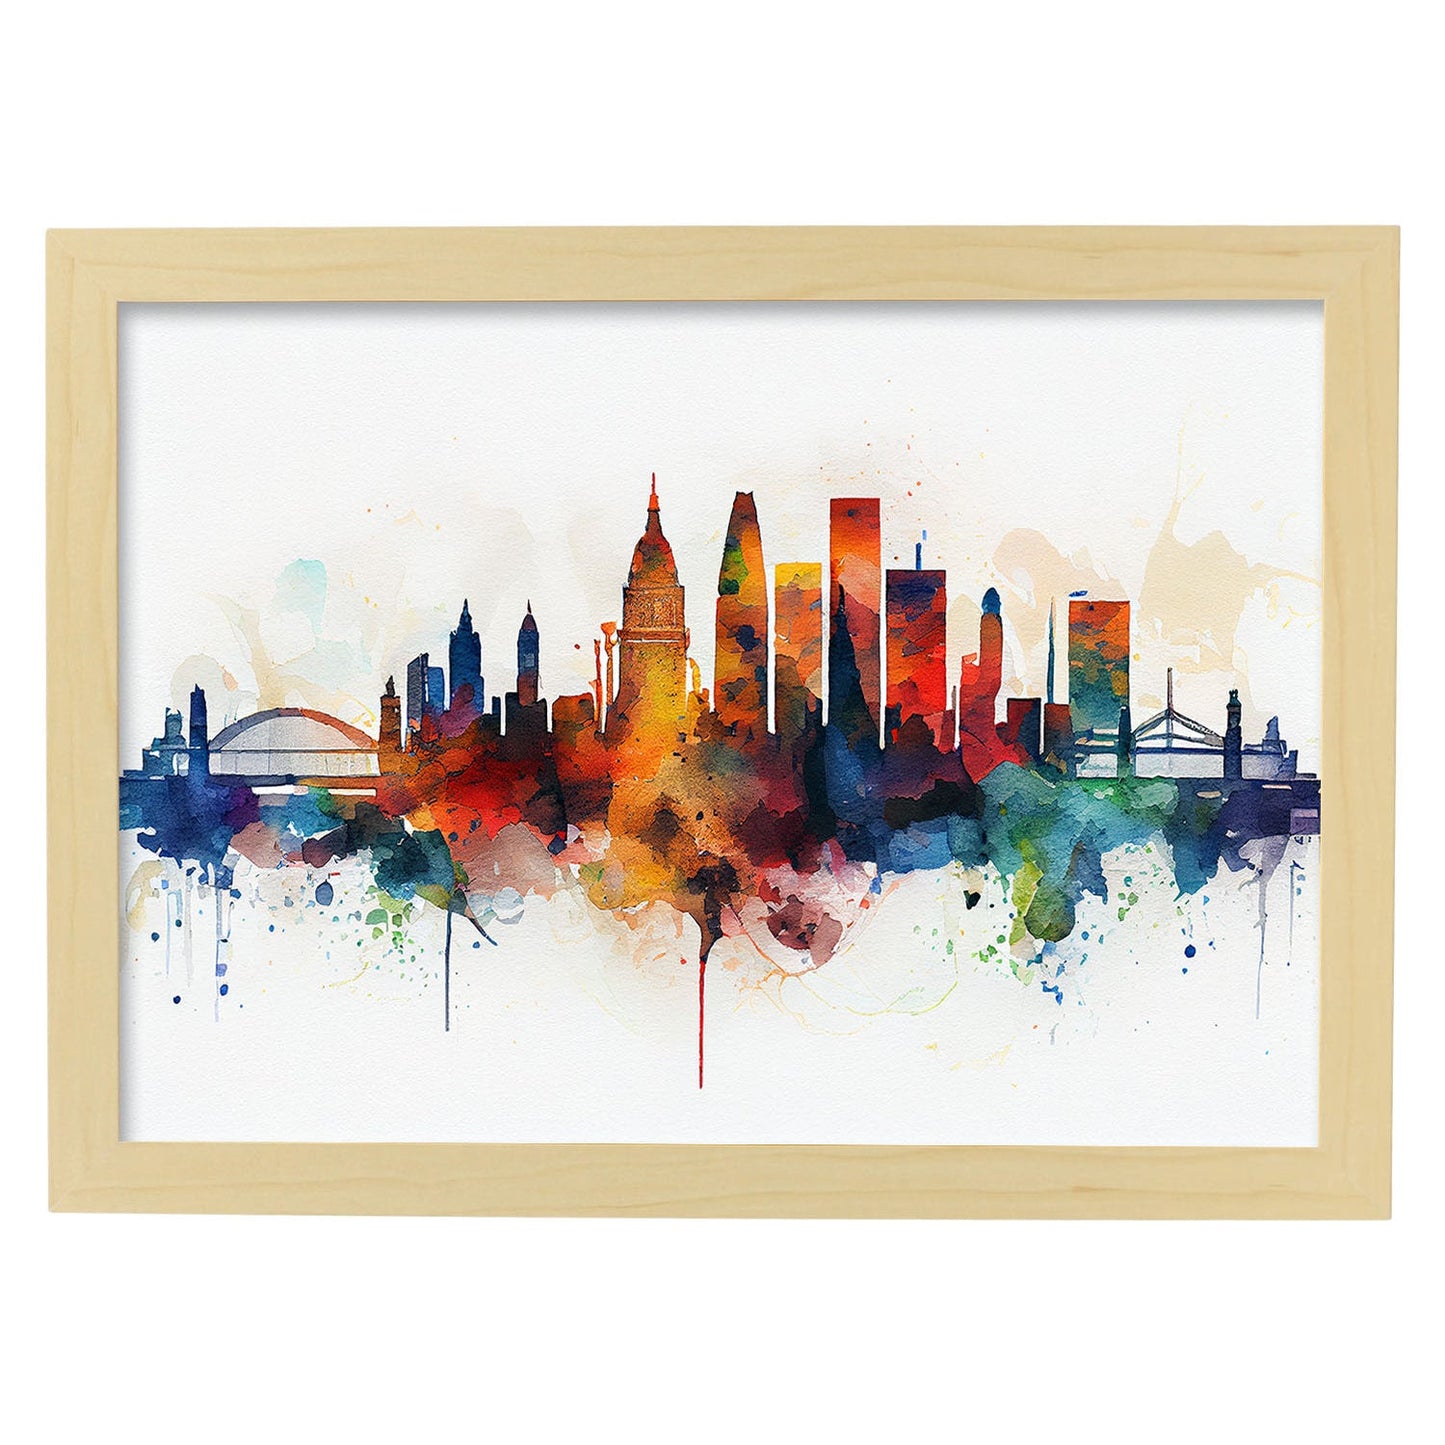 Nacnic watercolor of a skyline of the city of London_1. Aesthetic Wall Art Prints for Bedroom or Living Room Design.-Artwork-Nacnic-A4-Marco Madera Clara-Nacnic Estudio SL